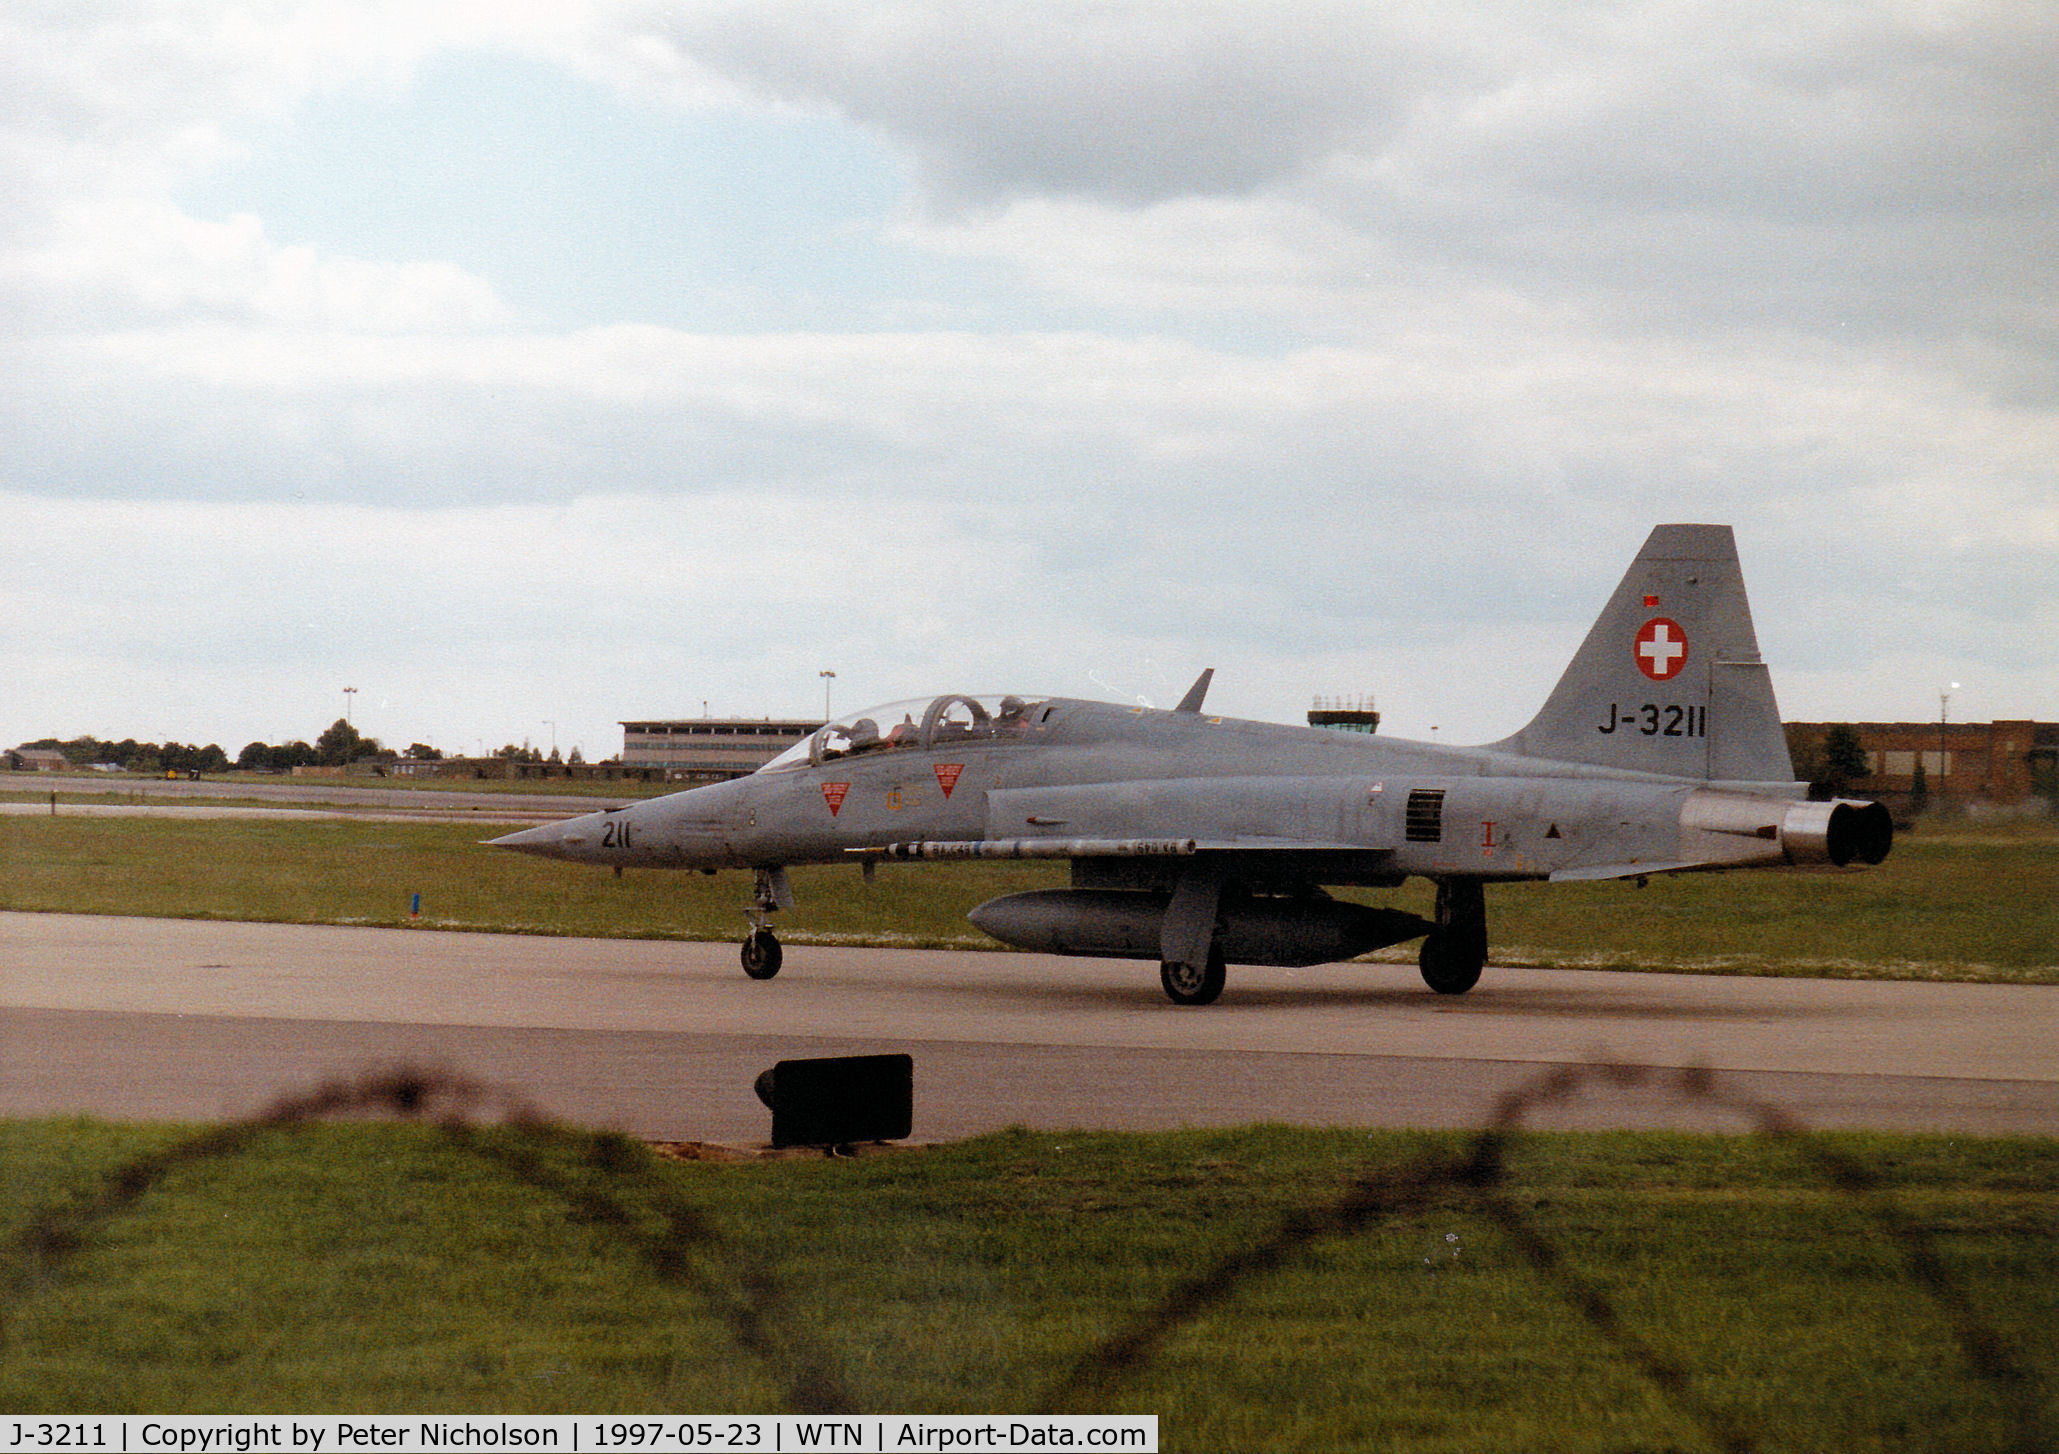 J-3211, 1981 Northrop F-5F Tiger II C/N M1011, F-5F Tiger II of the Swiss Air Force on a visit to RAF Waddington in May 1997.